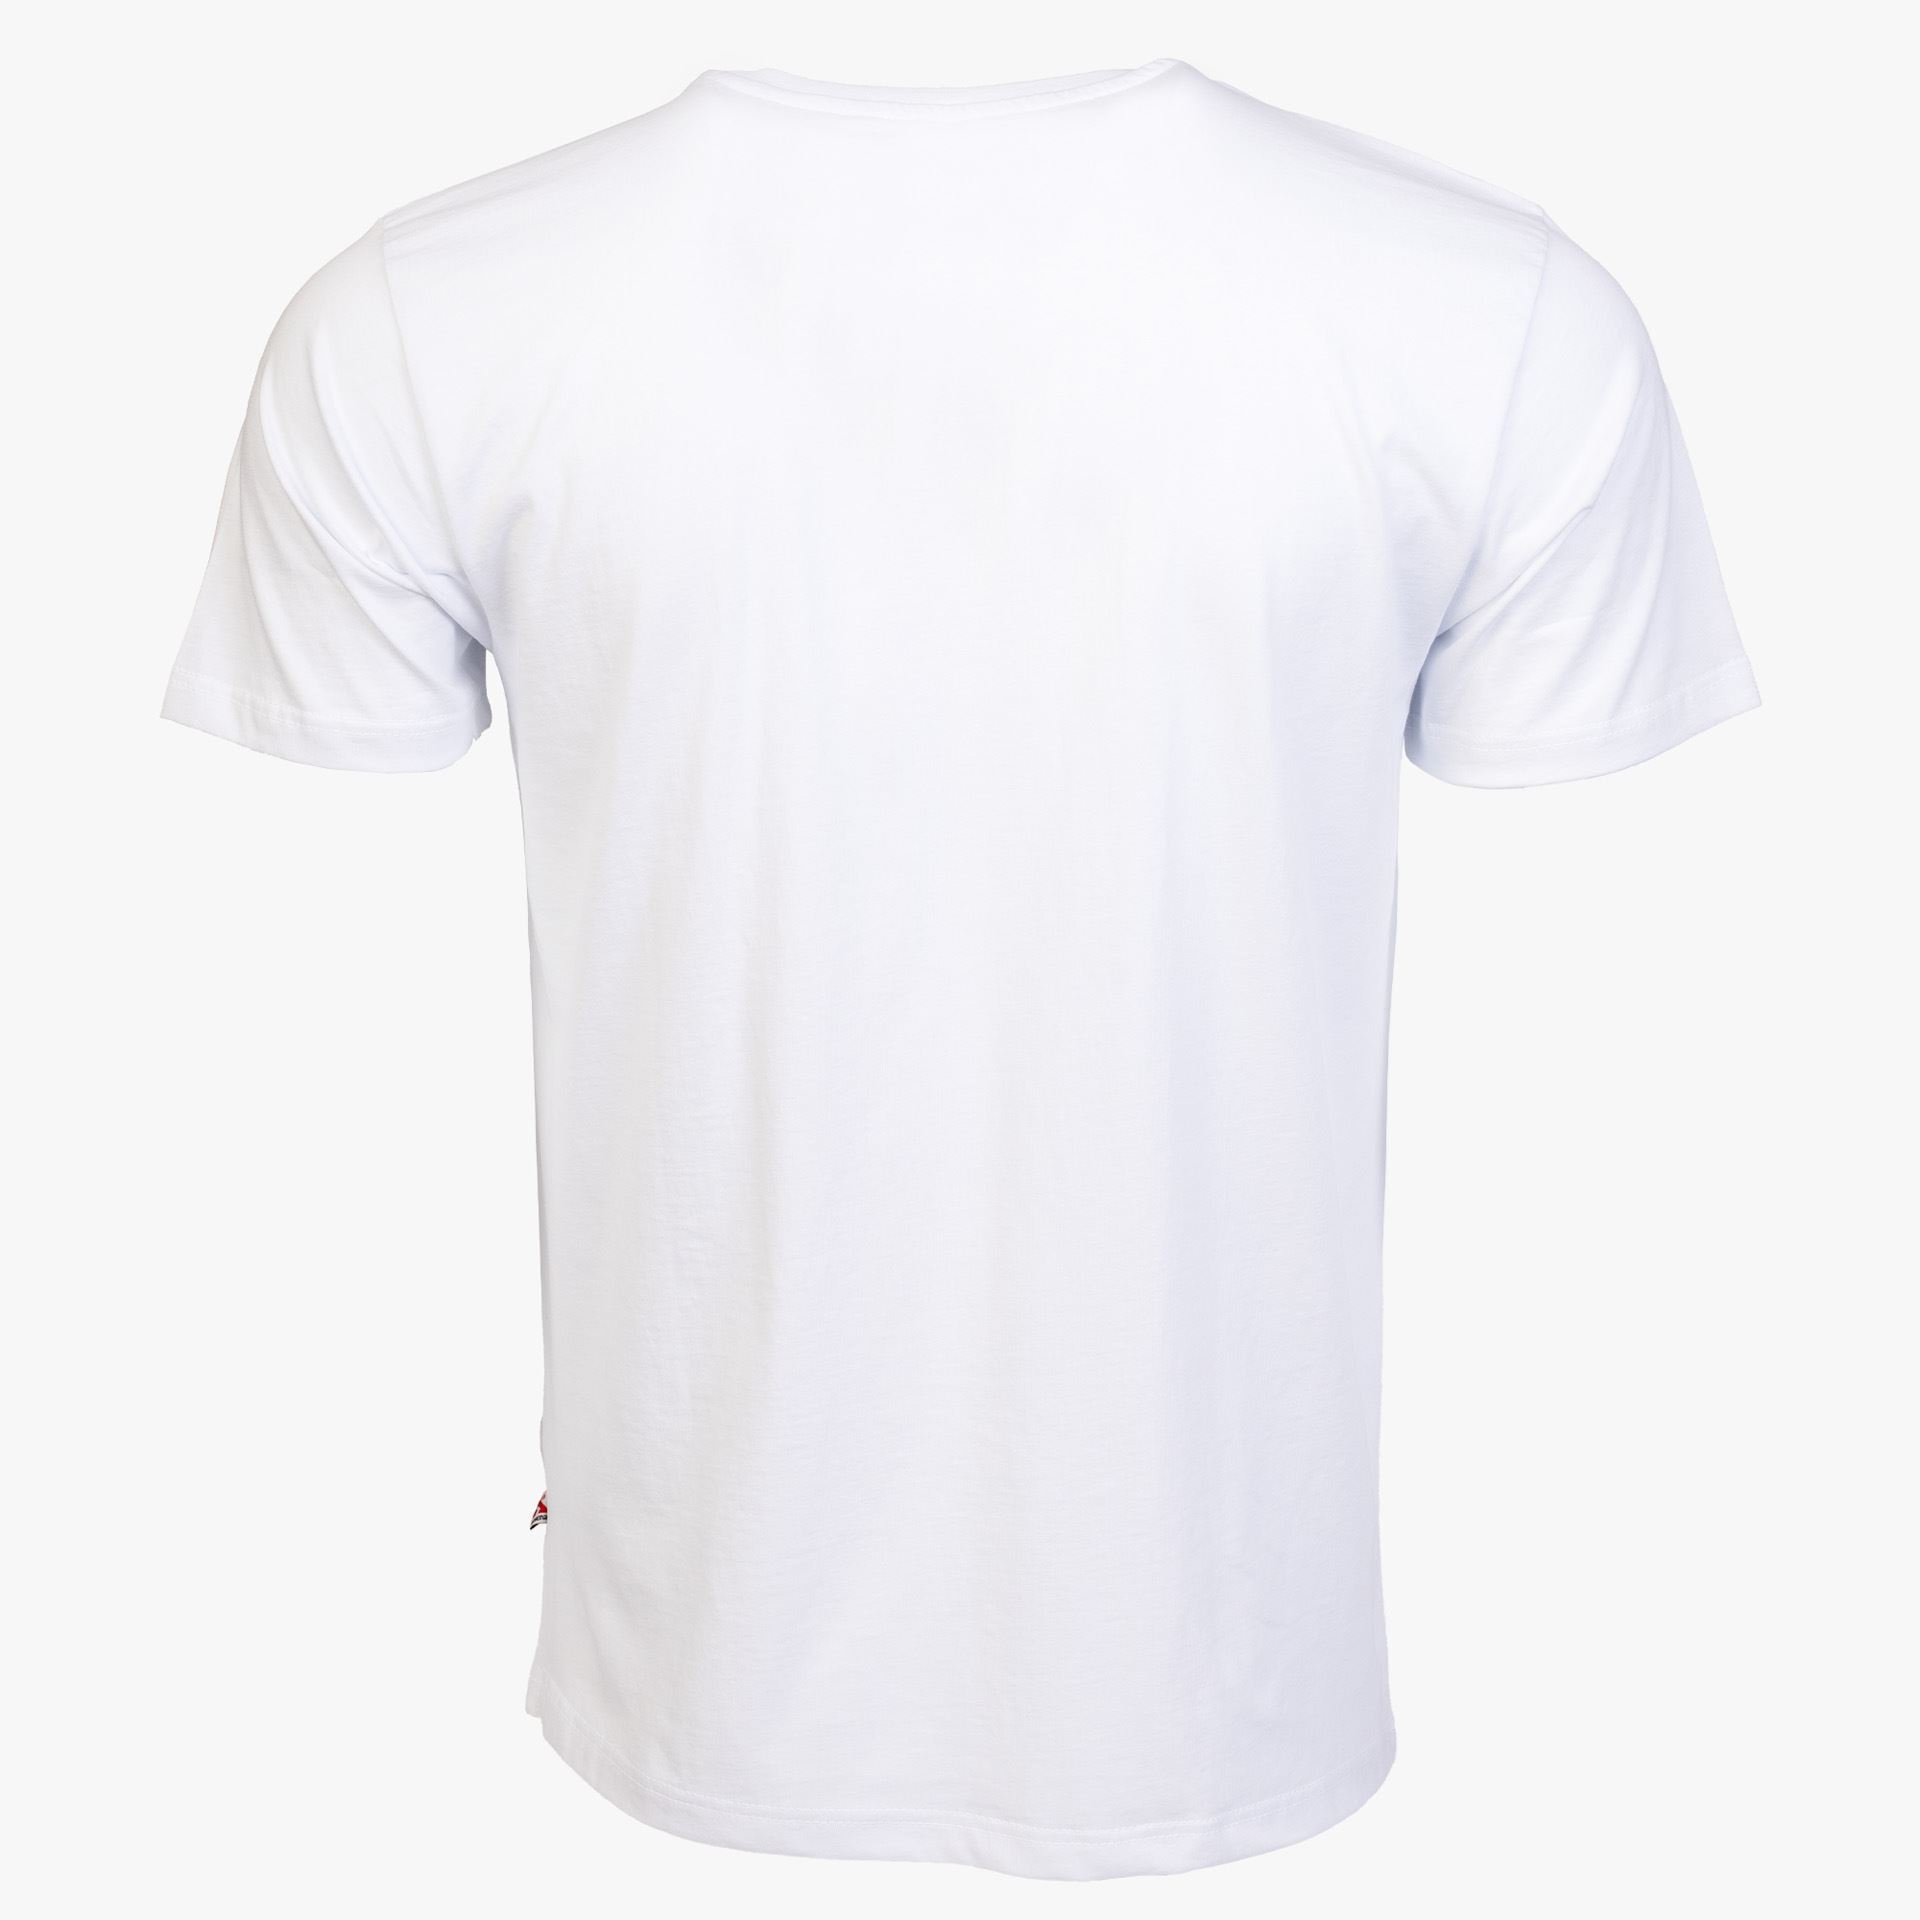 Arsenal White Cotton Relaxed Fit Classic T-Shirt at K-Var